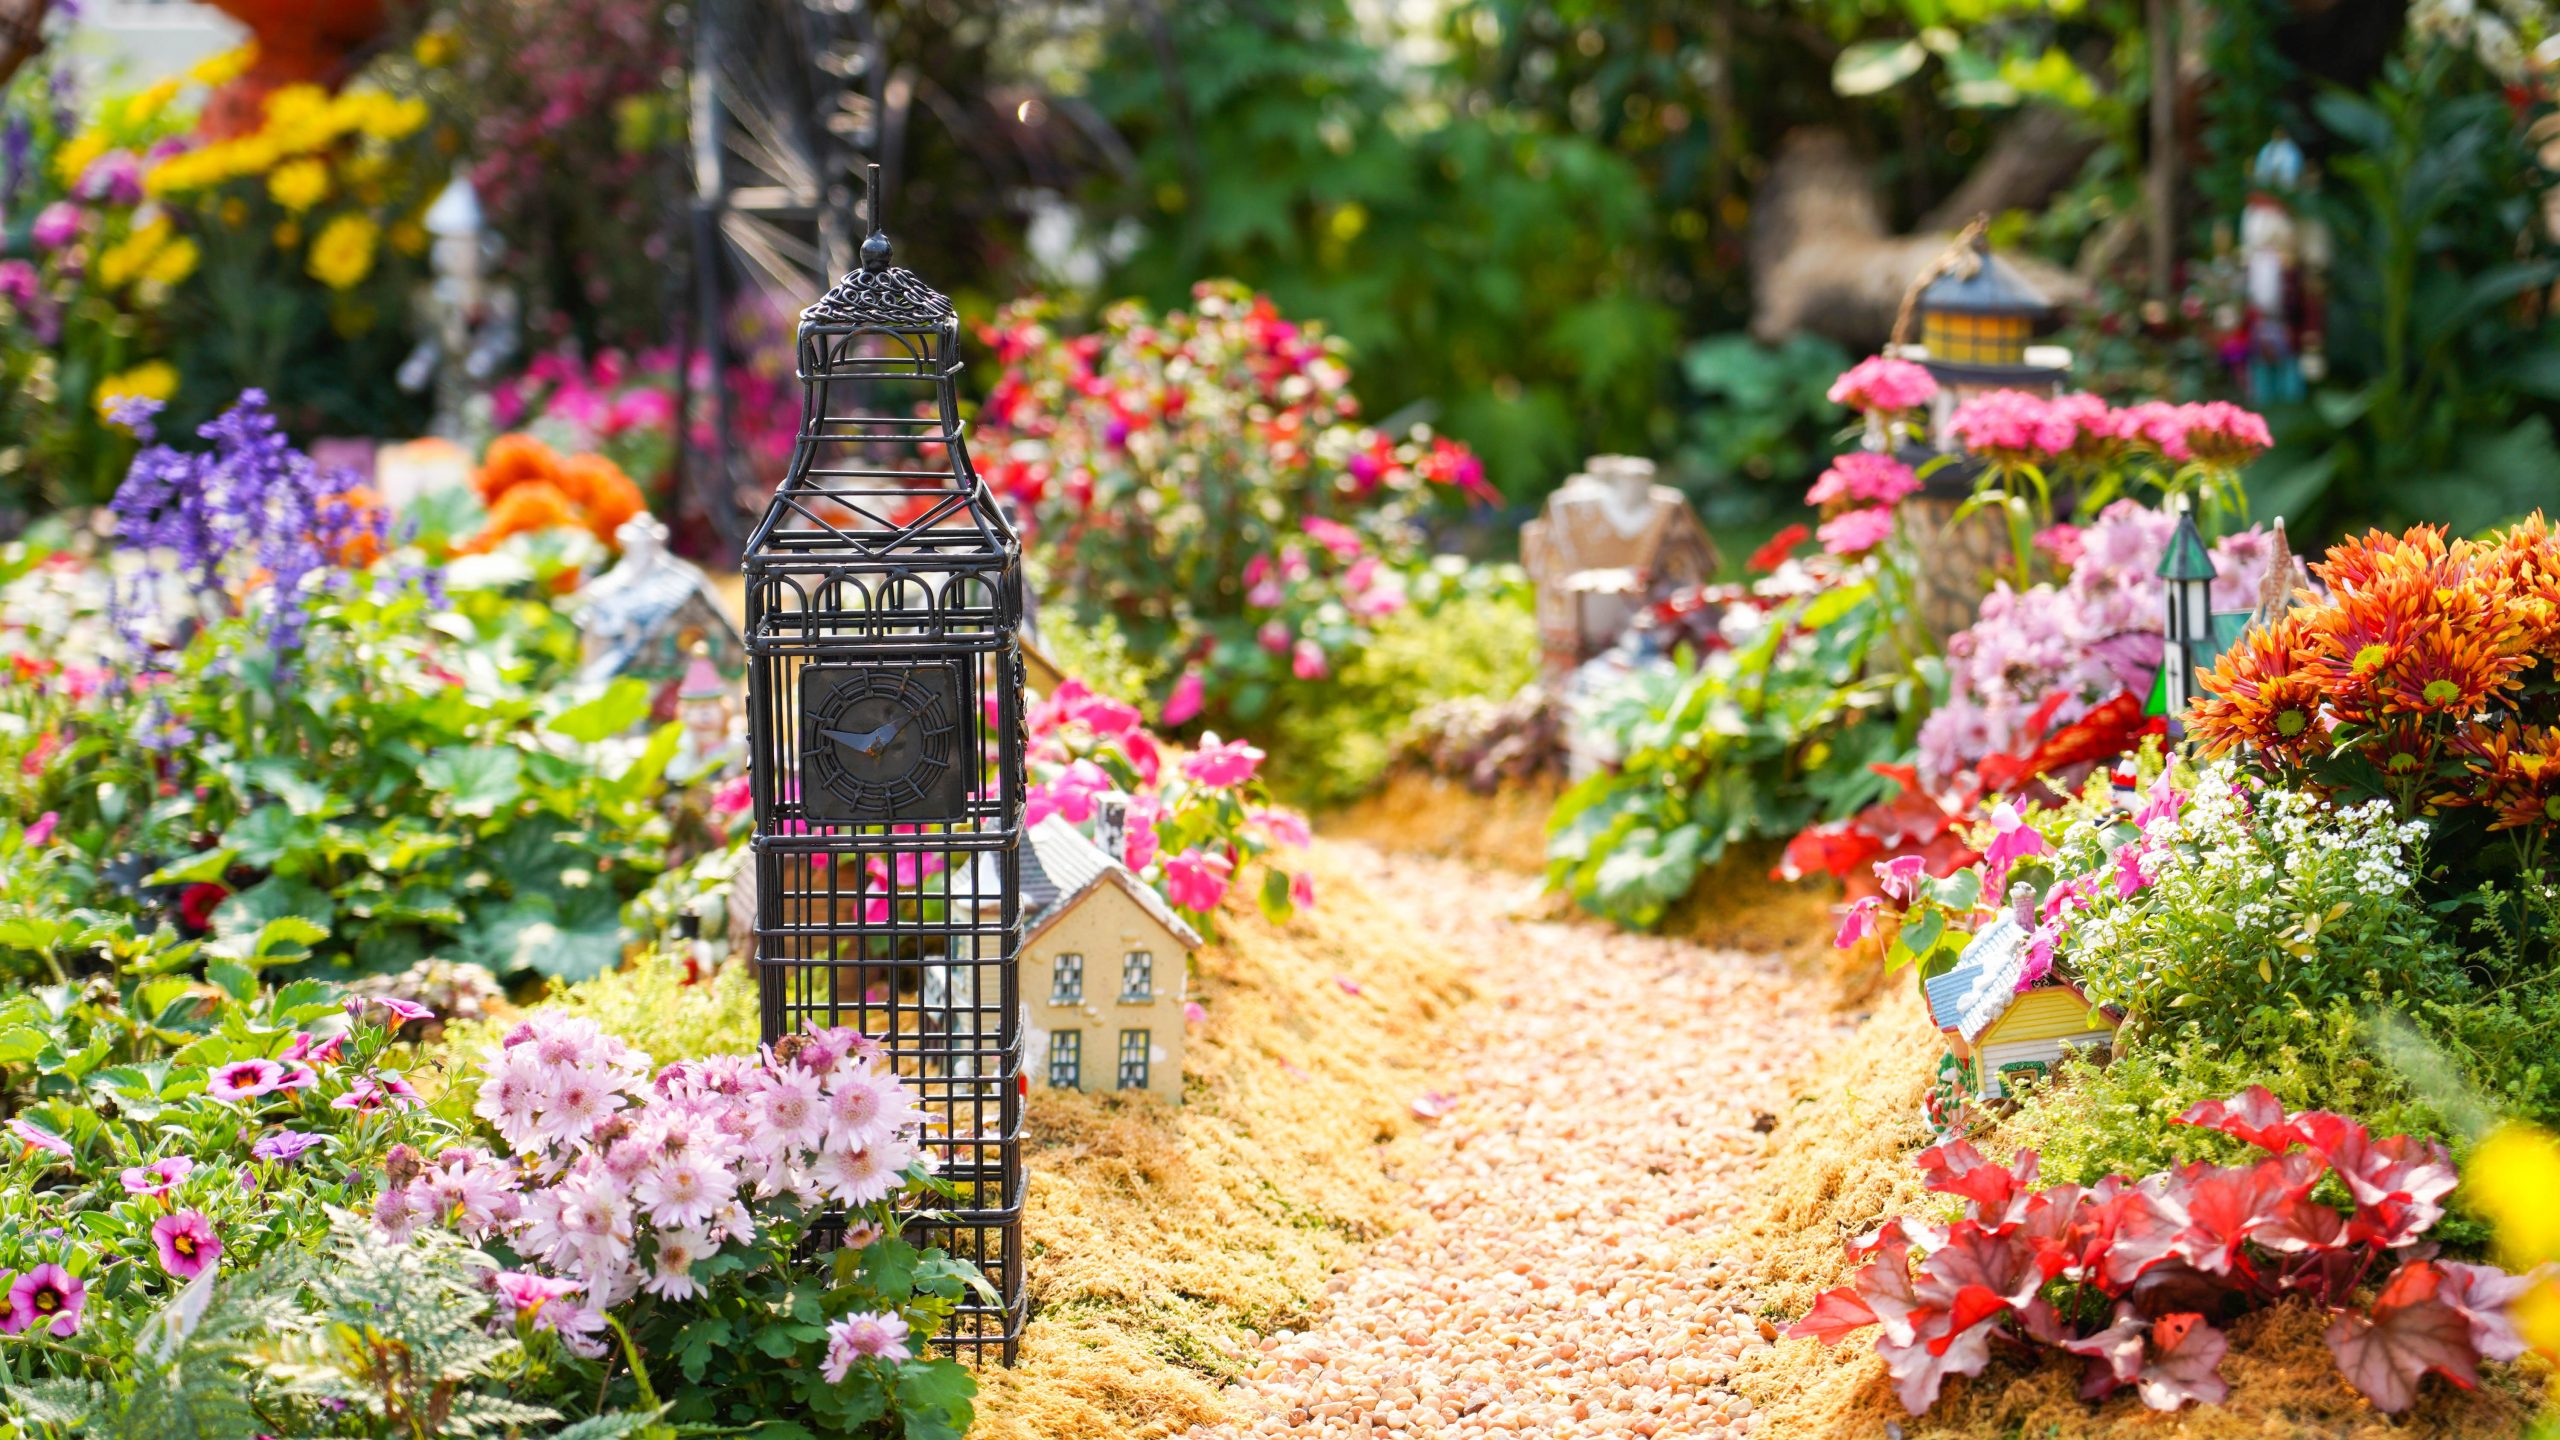 flower garden with whimsical figures at edges